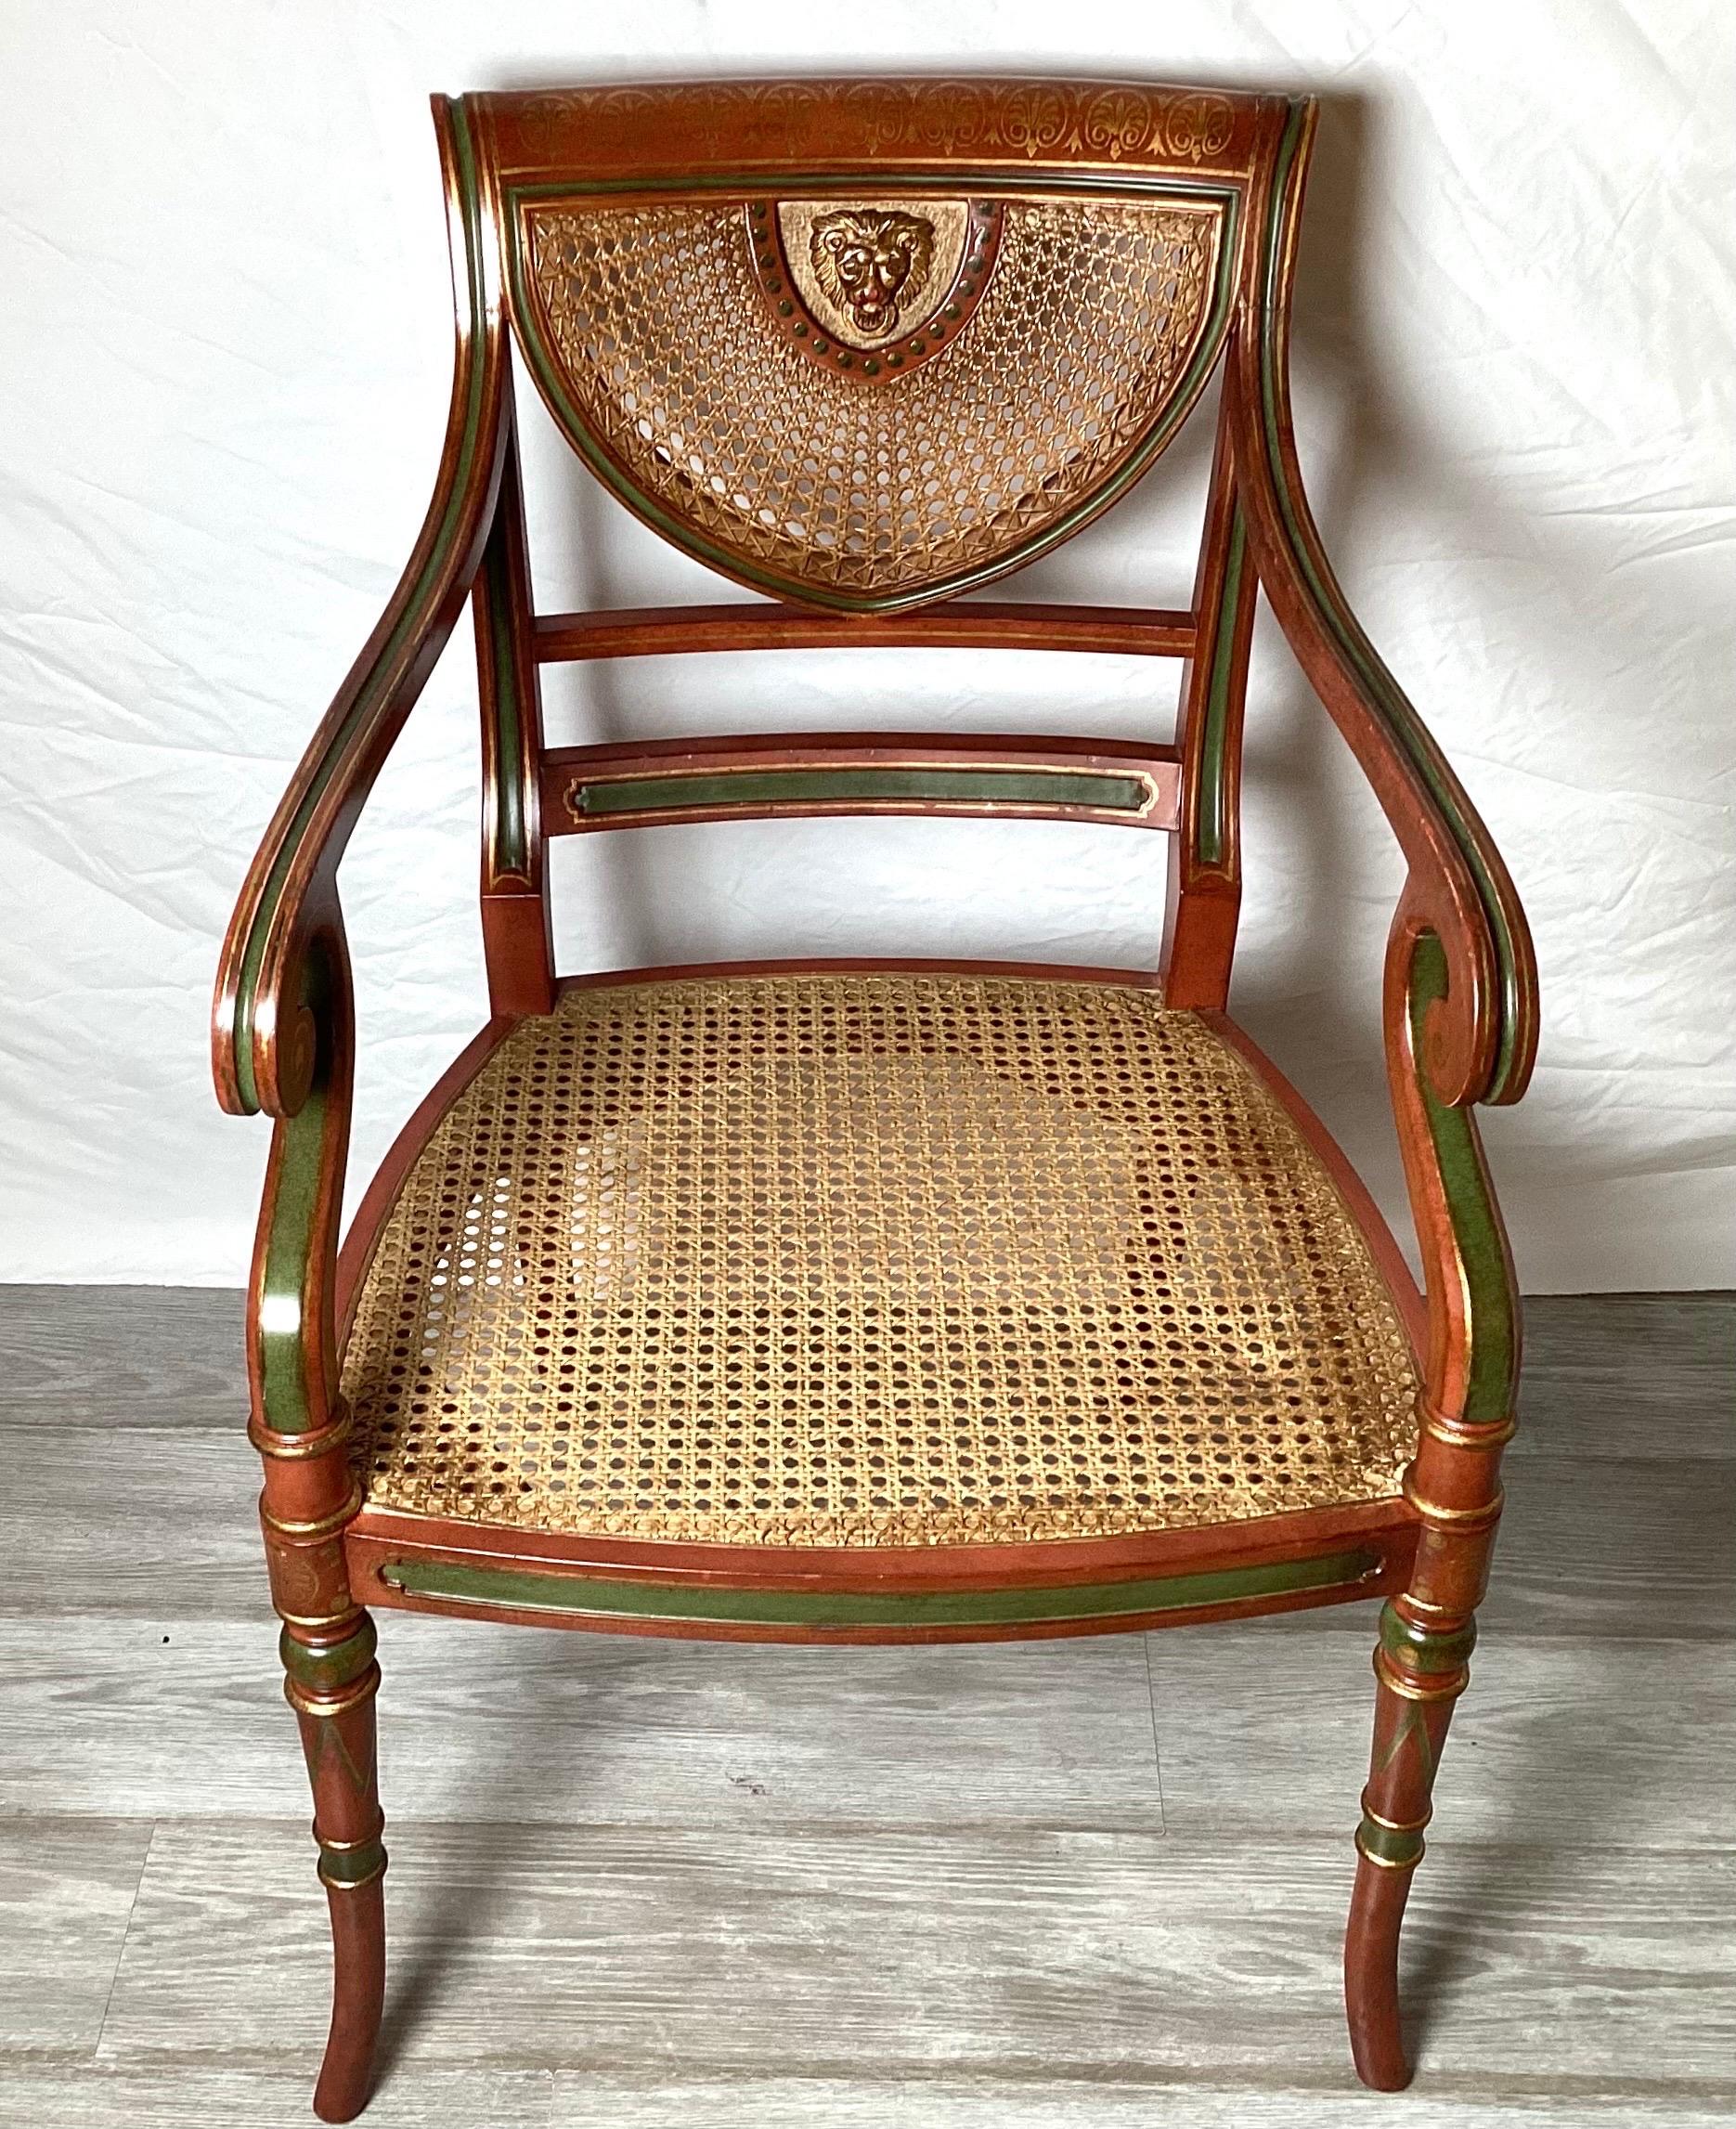 A Classic English Regency hand painted arm chair. Made by the expert cabinet maker, Smith and Watson NYC. The cane seat and back in very good condition, would require a seat cushion.